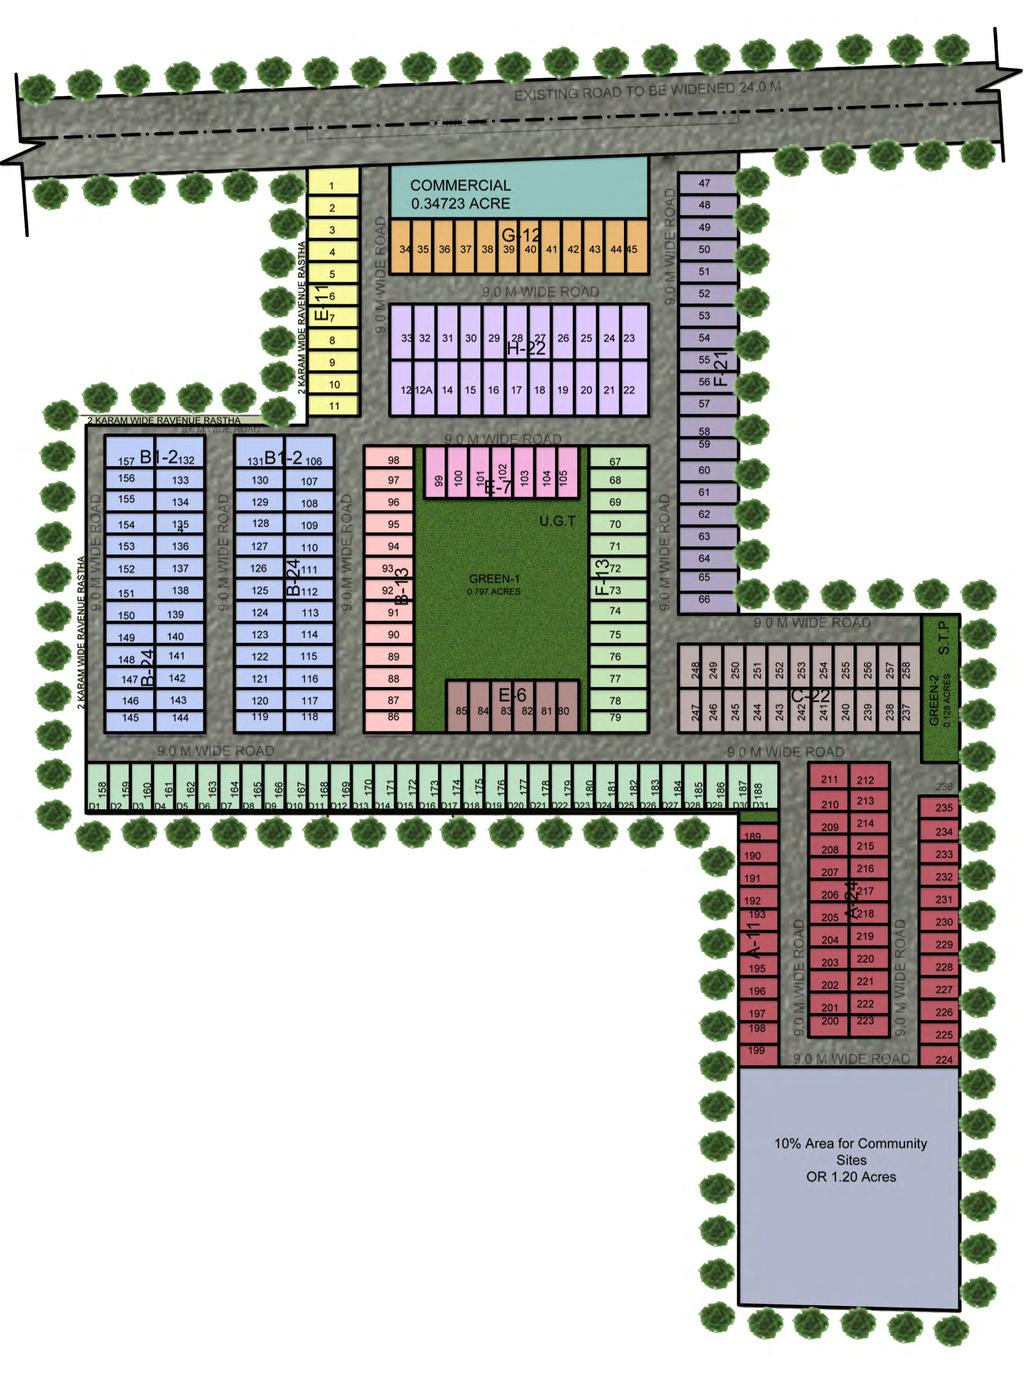 PLOTS AREA DETAILS Type Area in Area in Size in Mtr. (Approx) Sq. Yard (Approx) Mtr. (L x W) A 83.98 100.43 6.85 x 12.26 48 B 101.05 121.40 6.70 x 15.15 61 C 90.32 108.02 6.70 x 13.48 22 D 103.18 123.